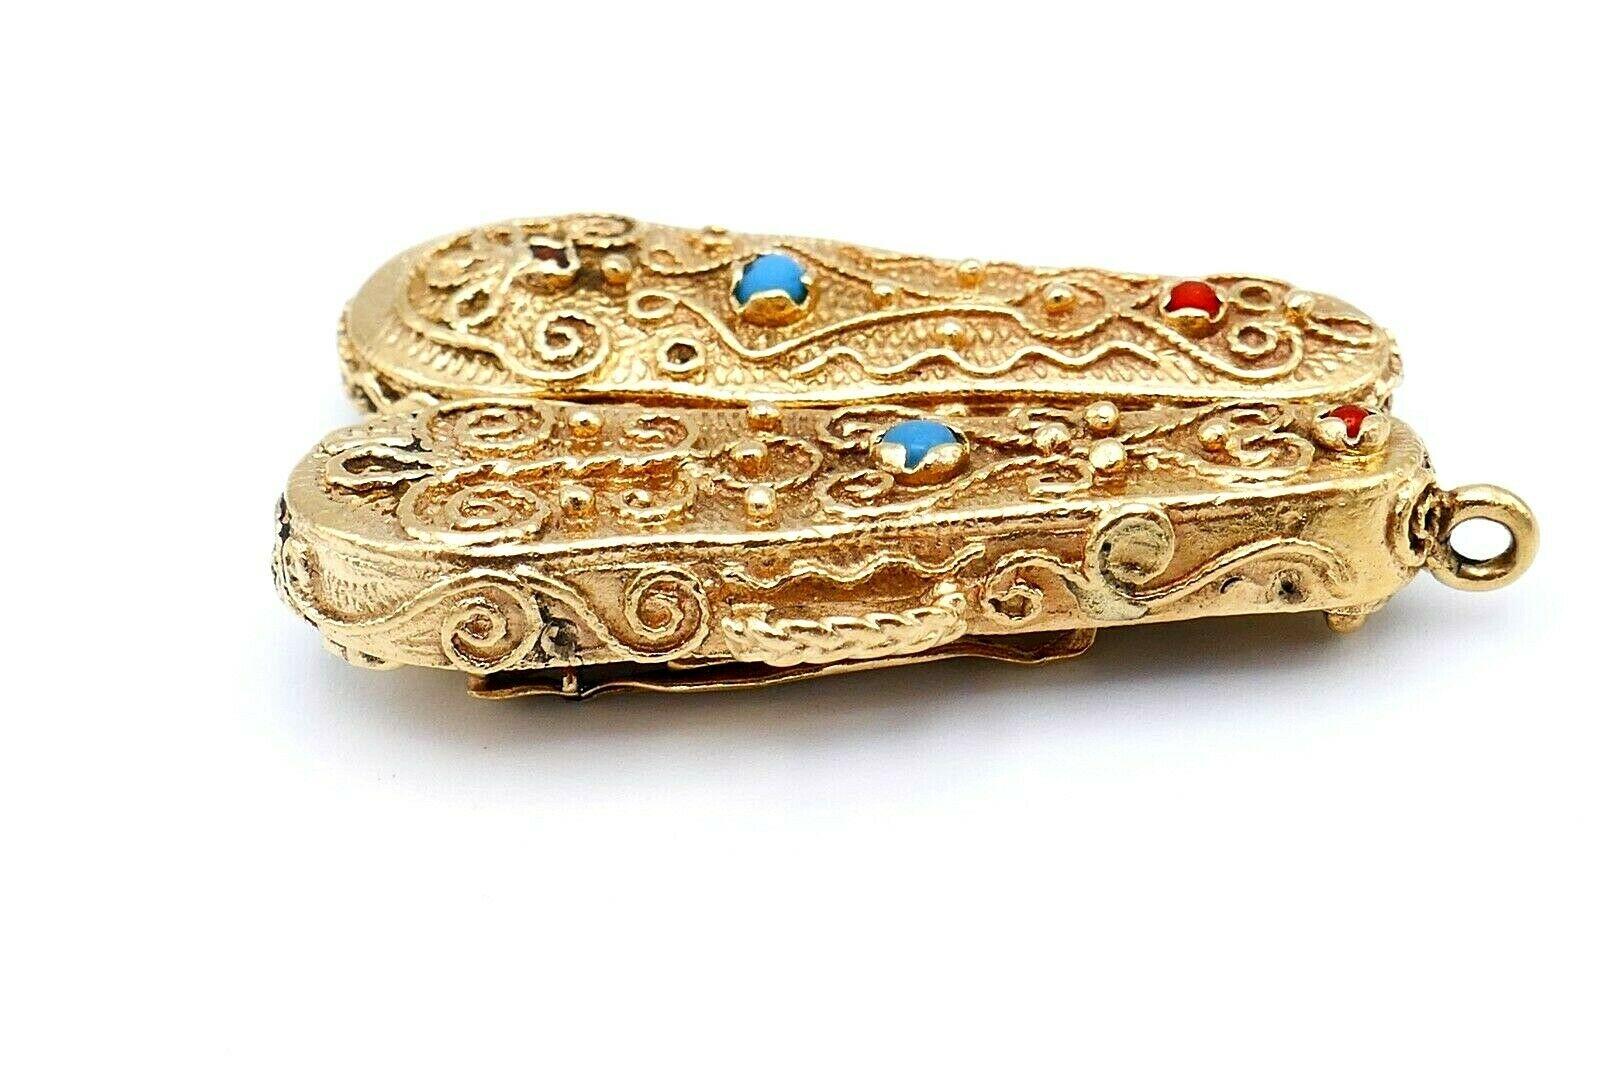 Bead Antique Yellow Gold Turquoise Peking Glass Violin in Case Charm